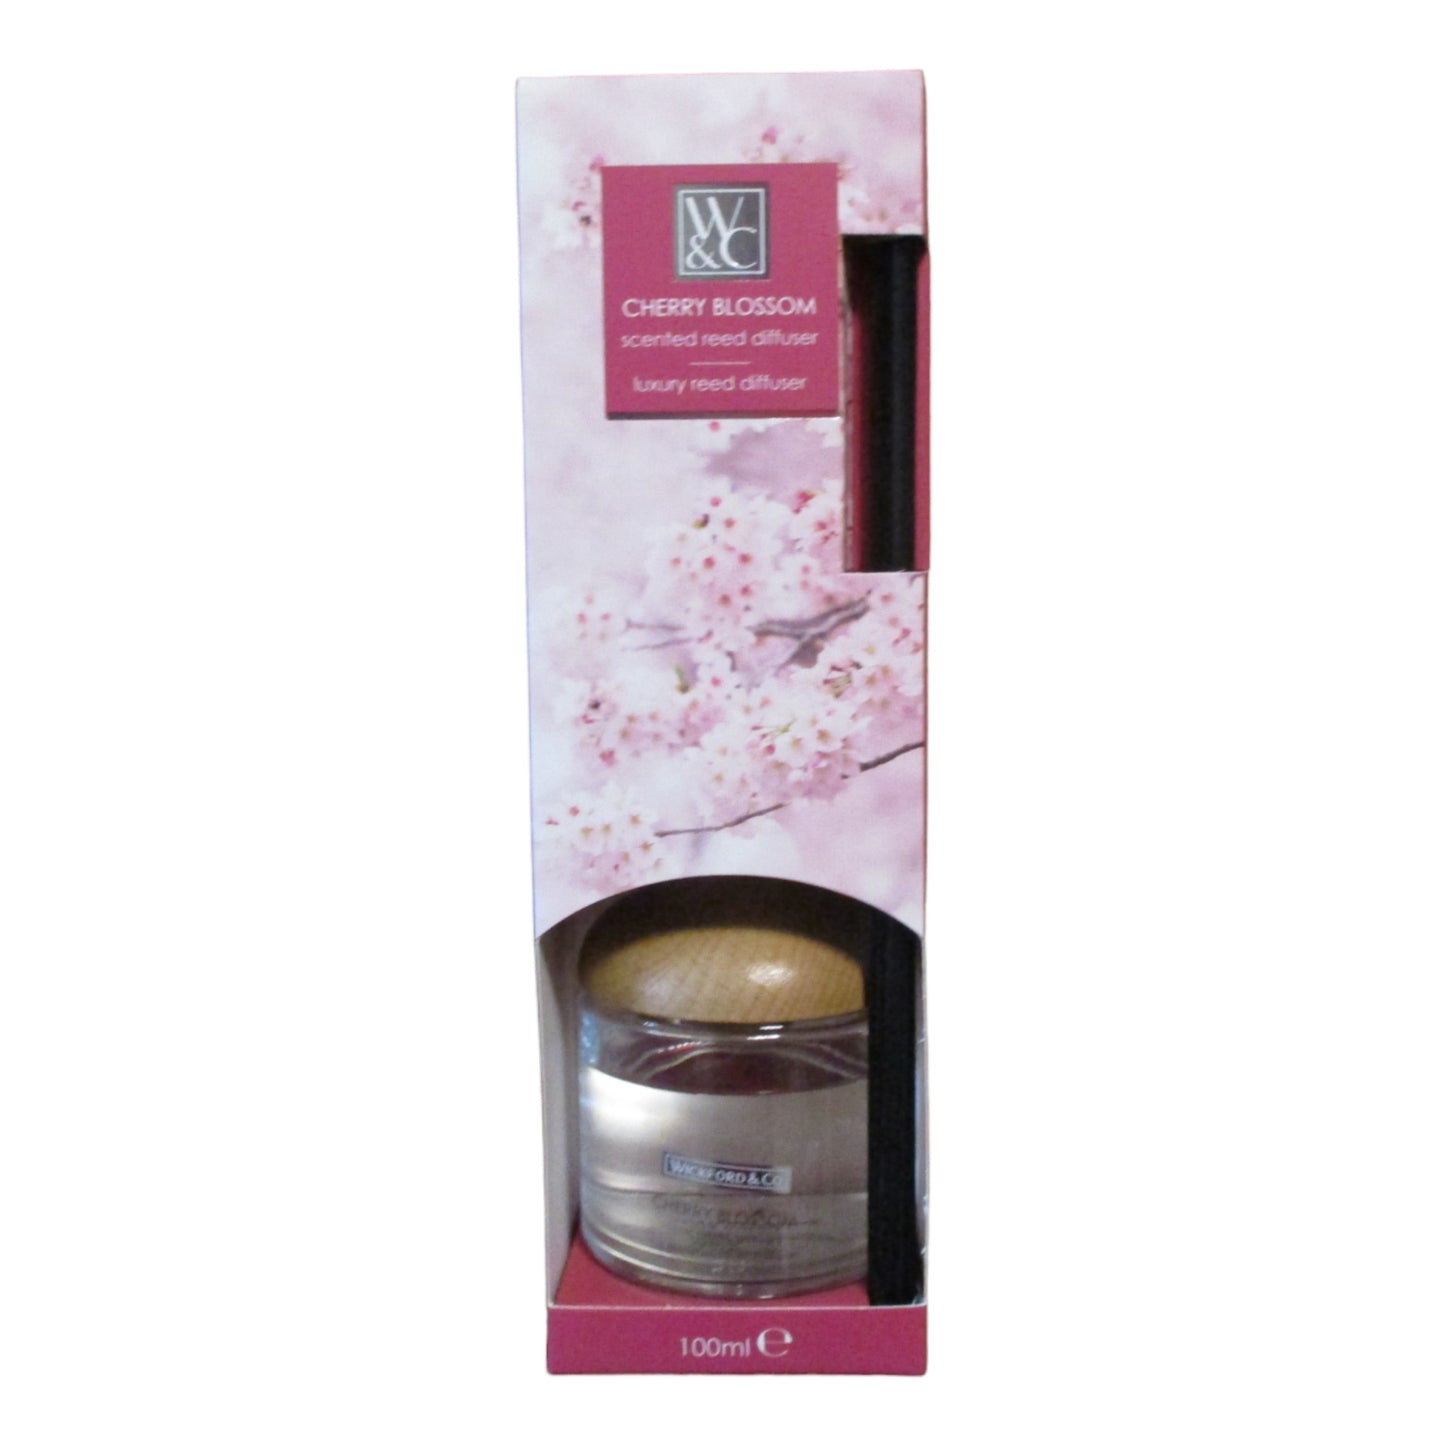 Wickford & Co - "Cherry Blossom" -  Reed Diffuser Luxury Fragrance 100ml